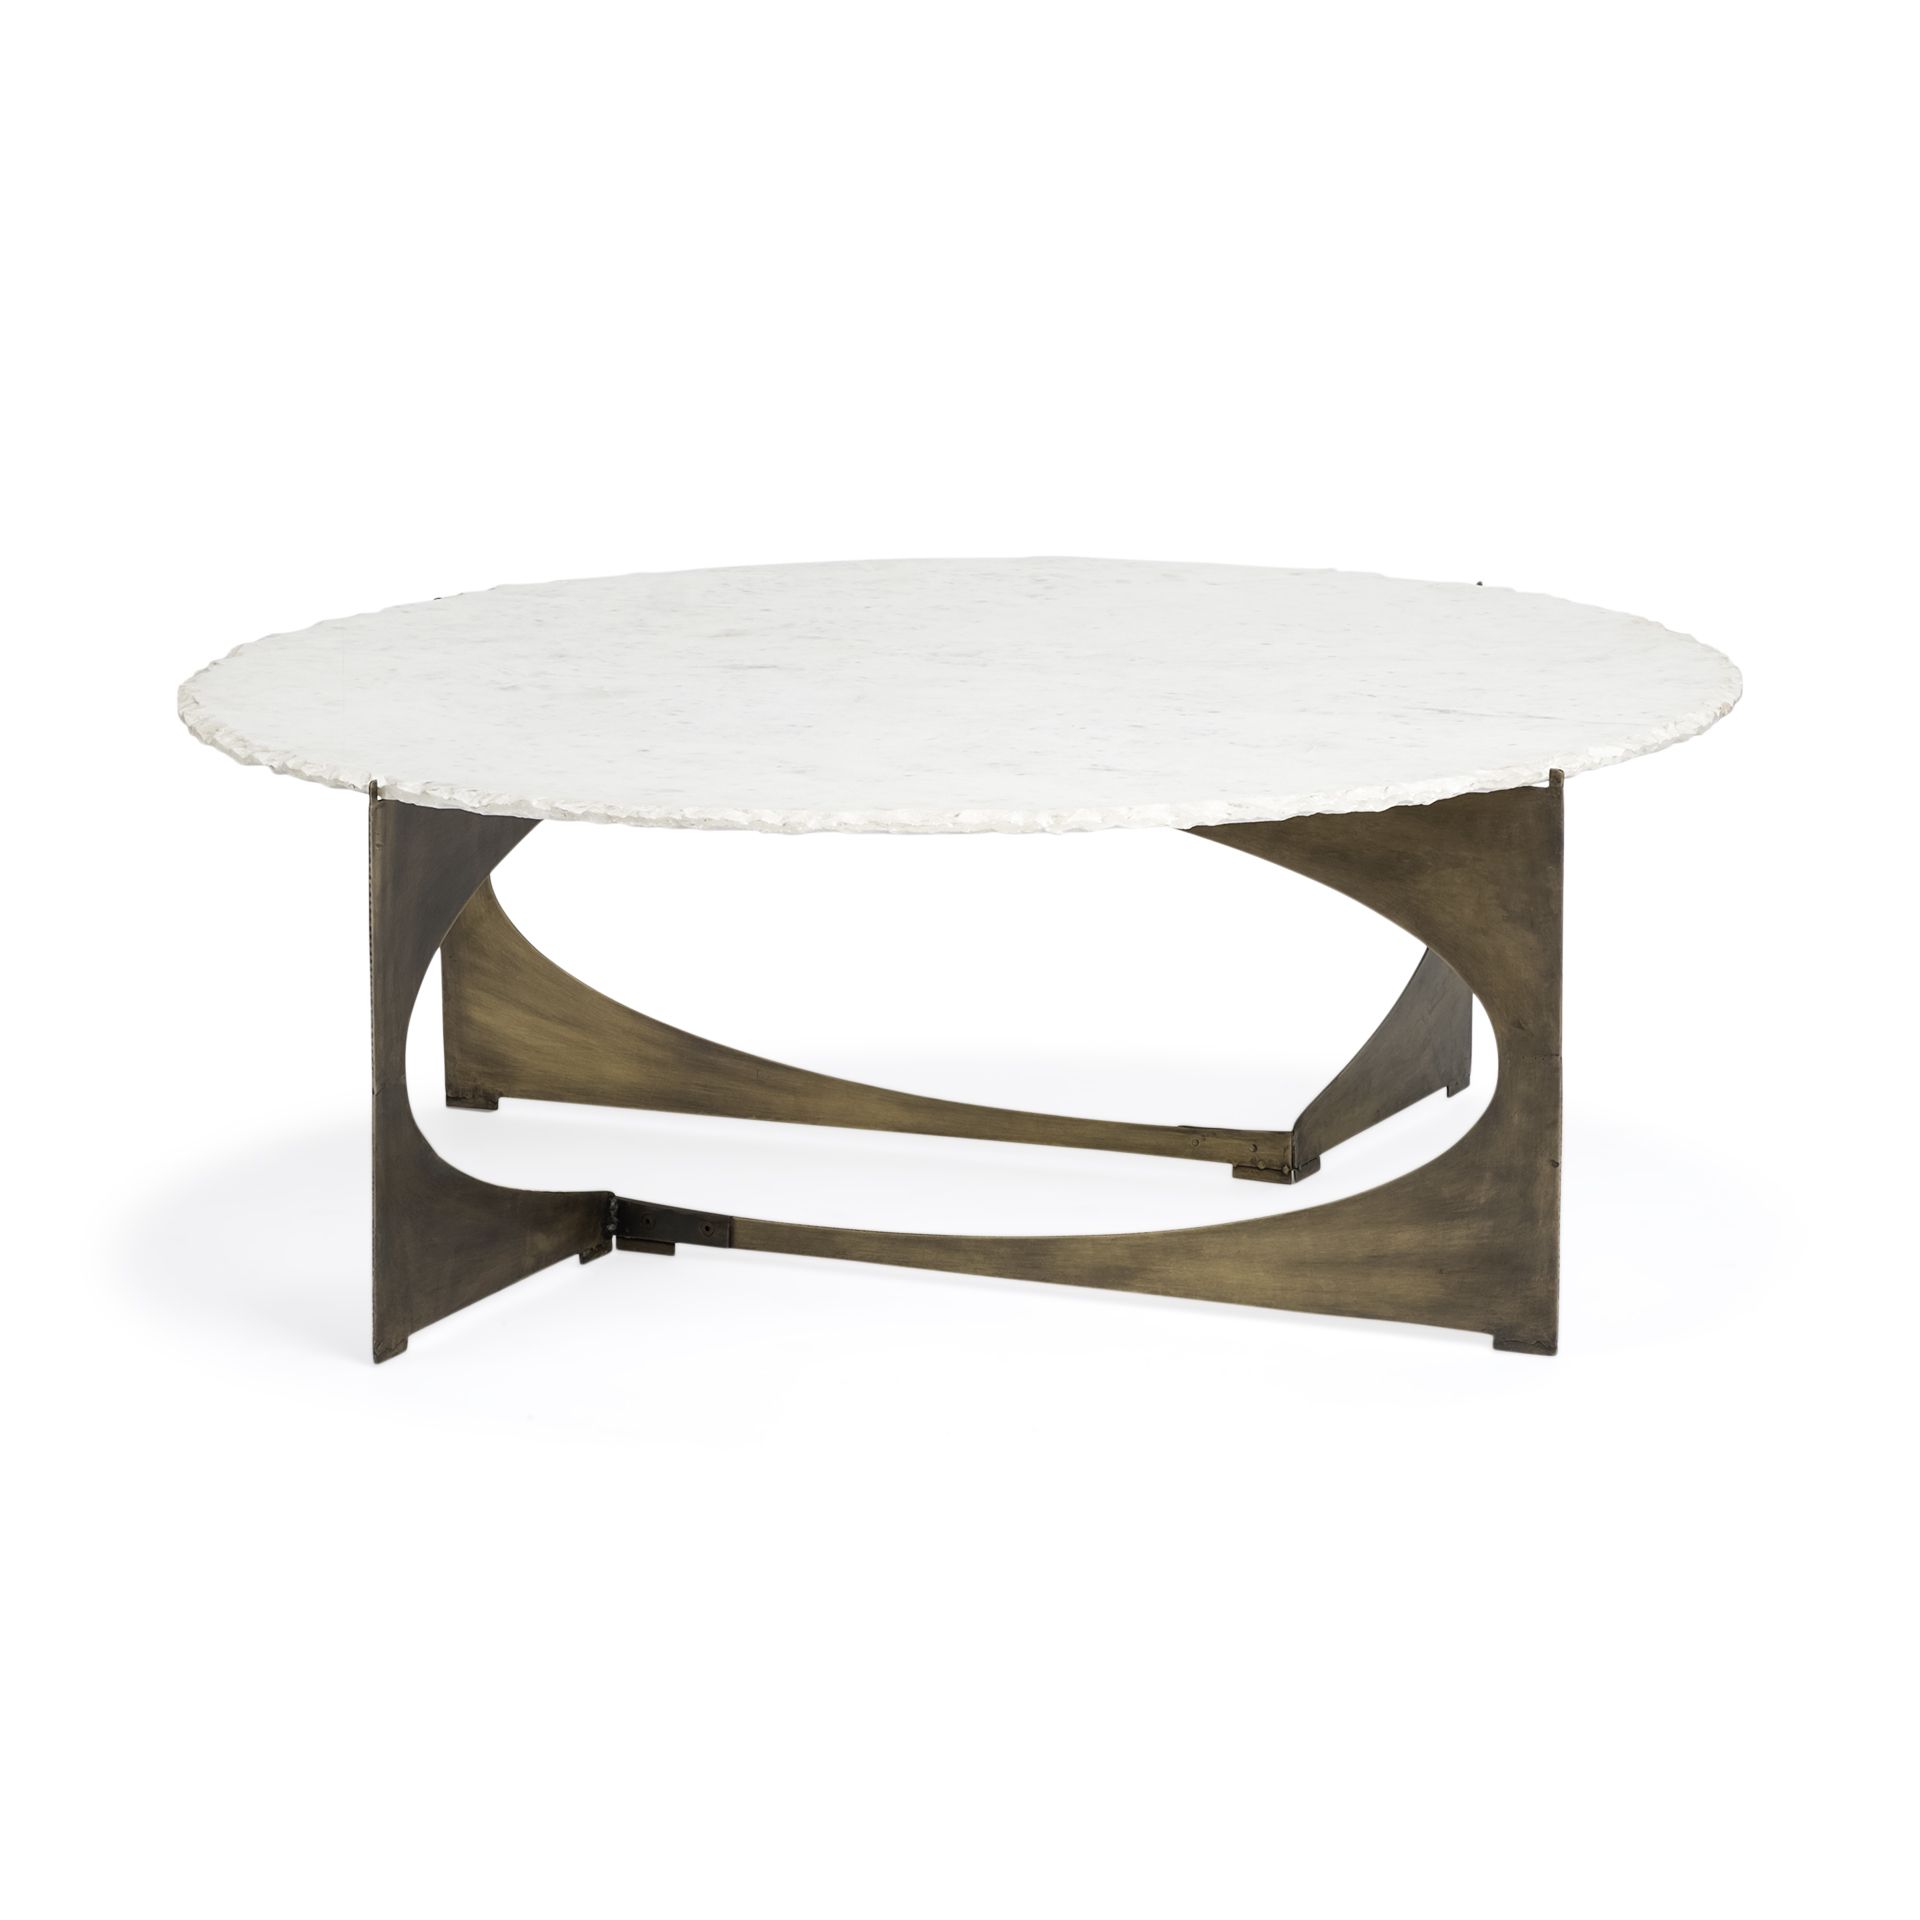 Reinhold I 49" Round White Marble Top Gold Metal Base For Fashionable Faux White Marble And Metal Coffee Tables (Gallery 5 of 20)